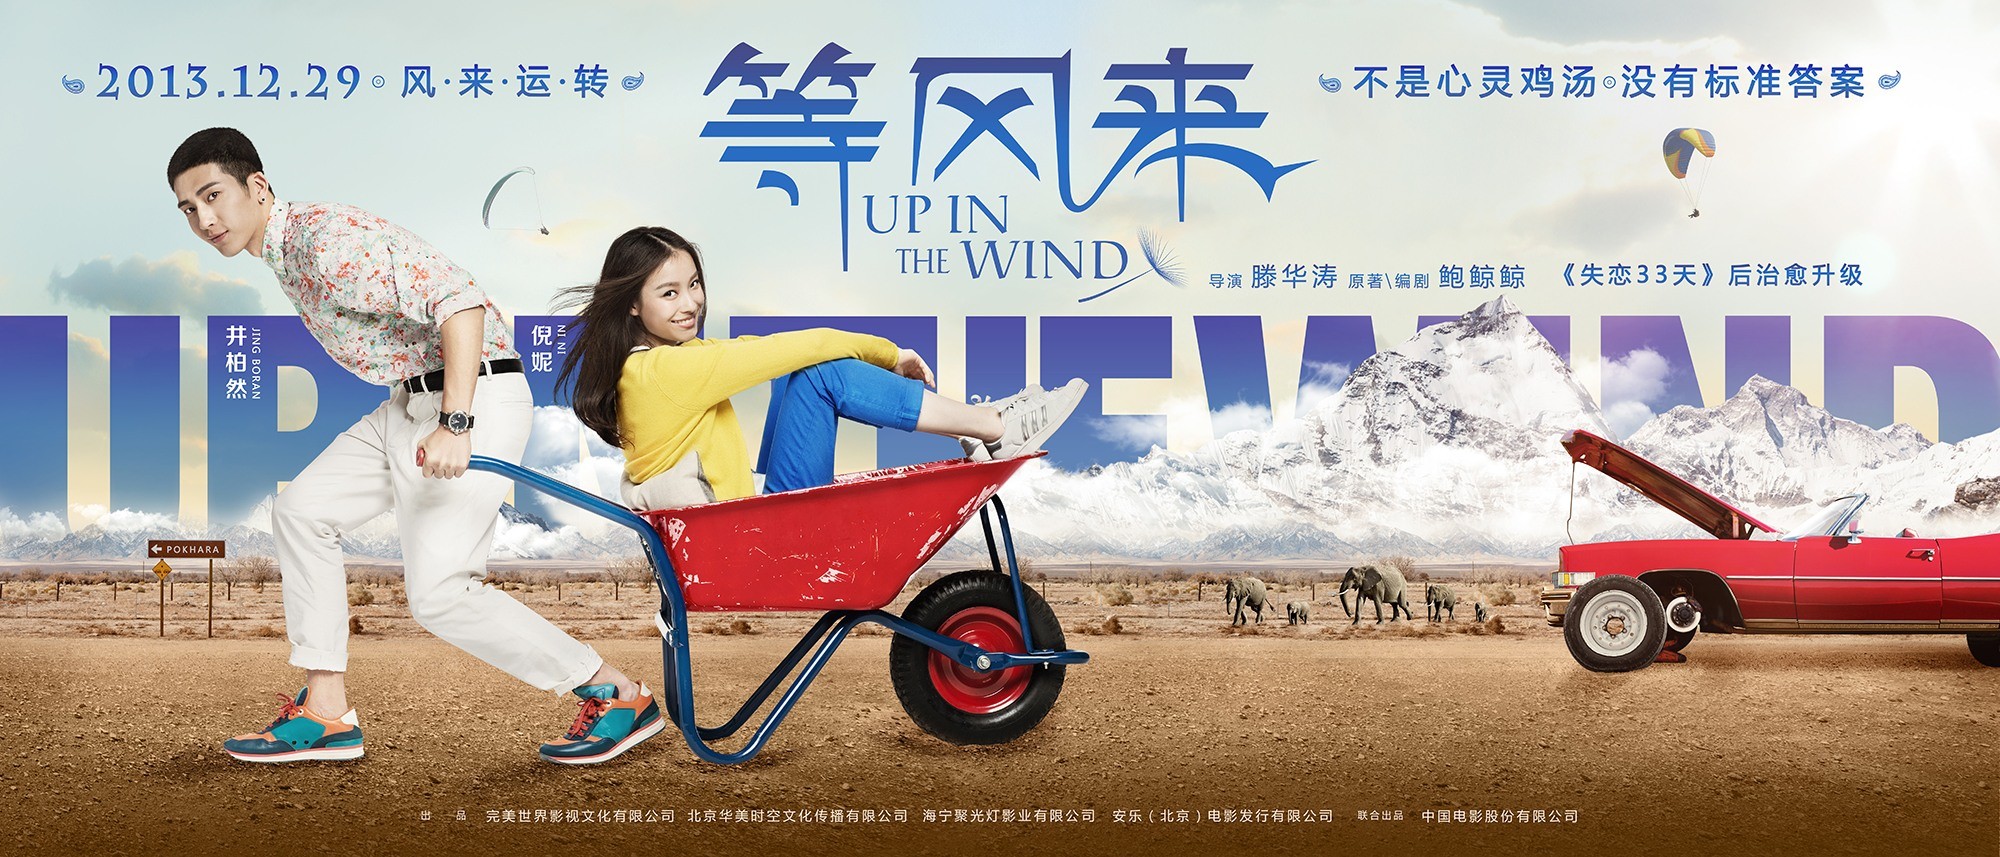 Mega Sized Movie Poster Image for Up in the Wind (#5 of 8)